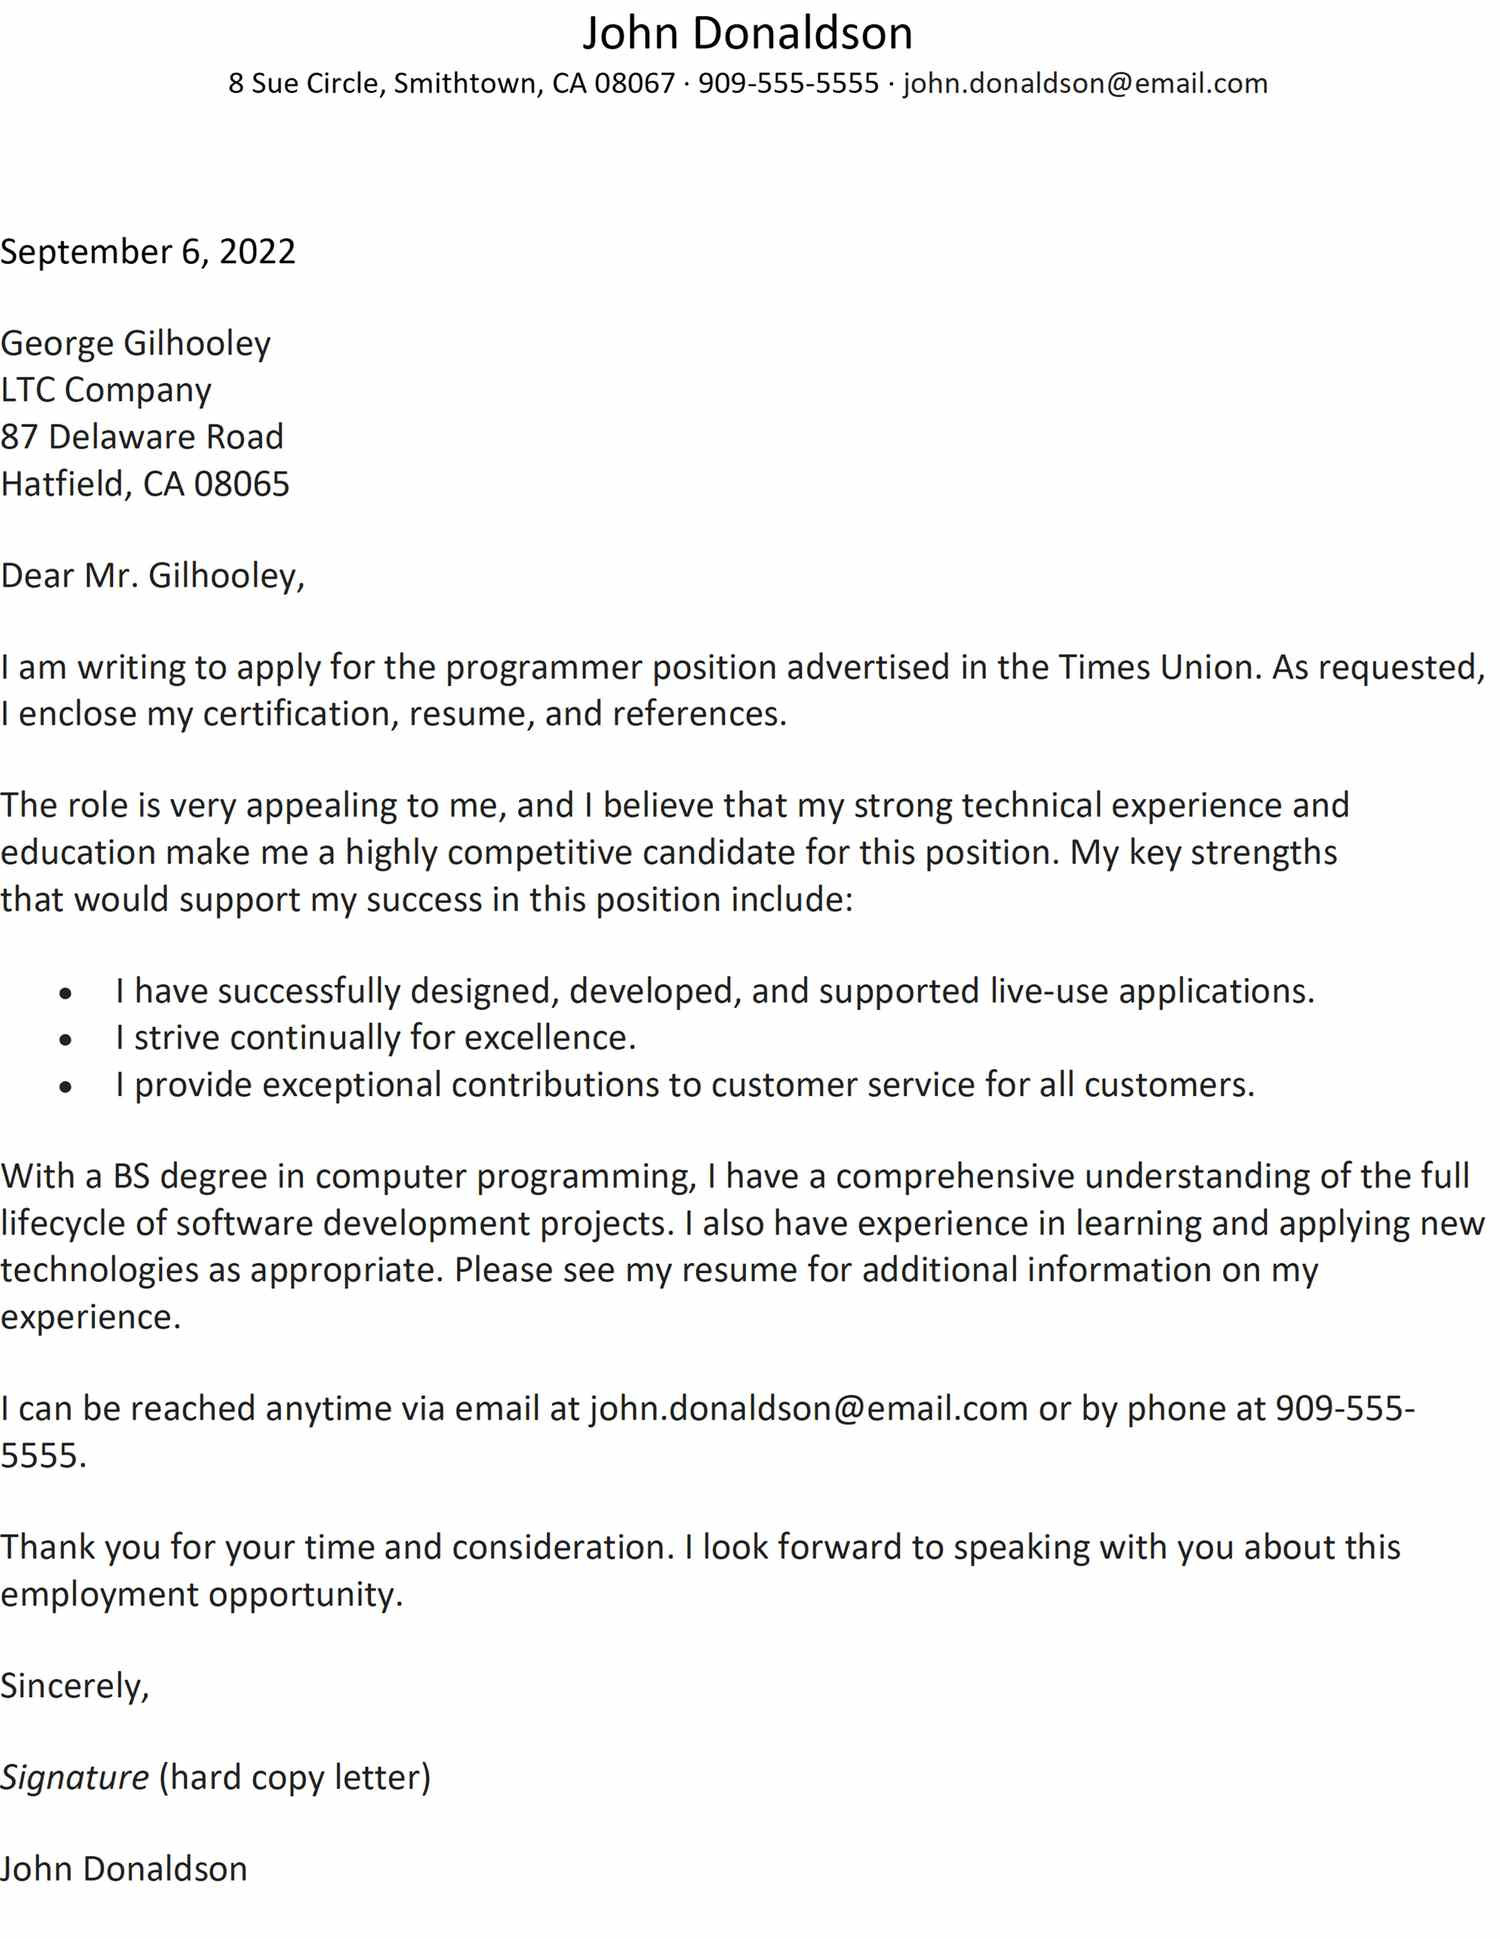 Sample Of A Great Resume Cover Letter Sample Cover Letter for A Job Application